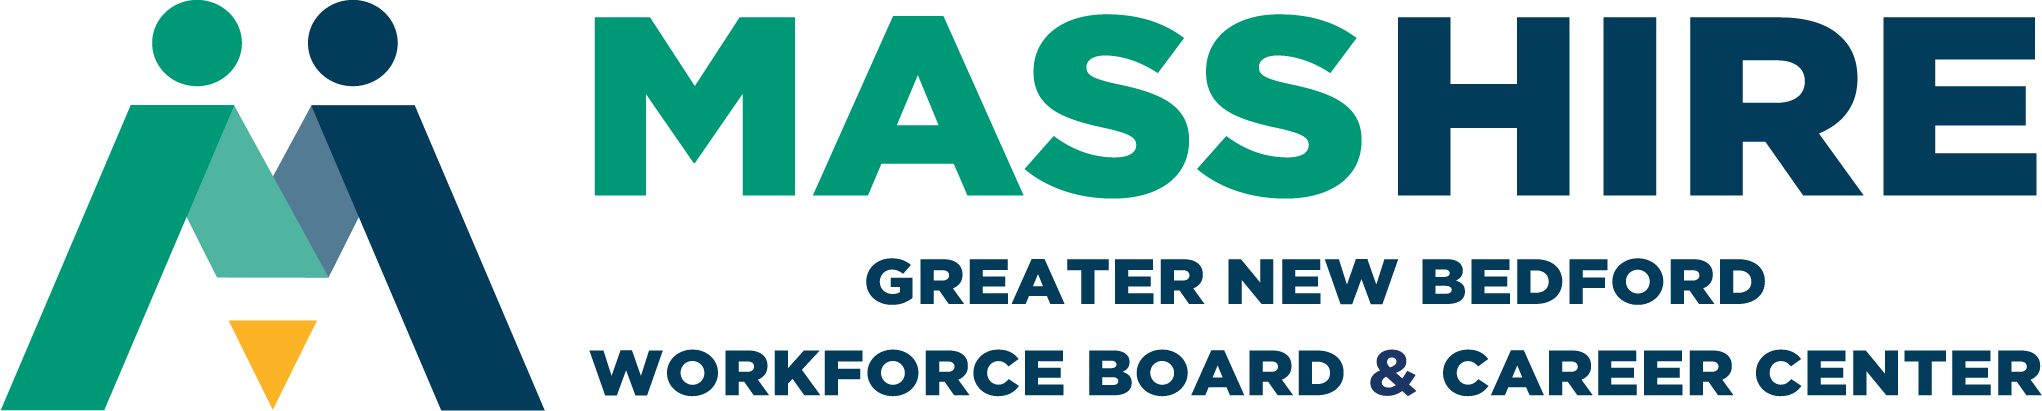 MassHire Greater New Bedford Workforce Board nd Career Center Logo